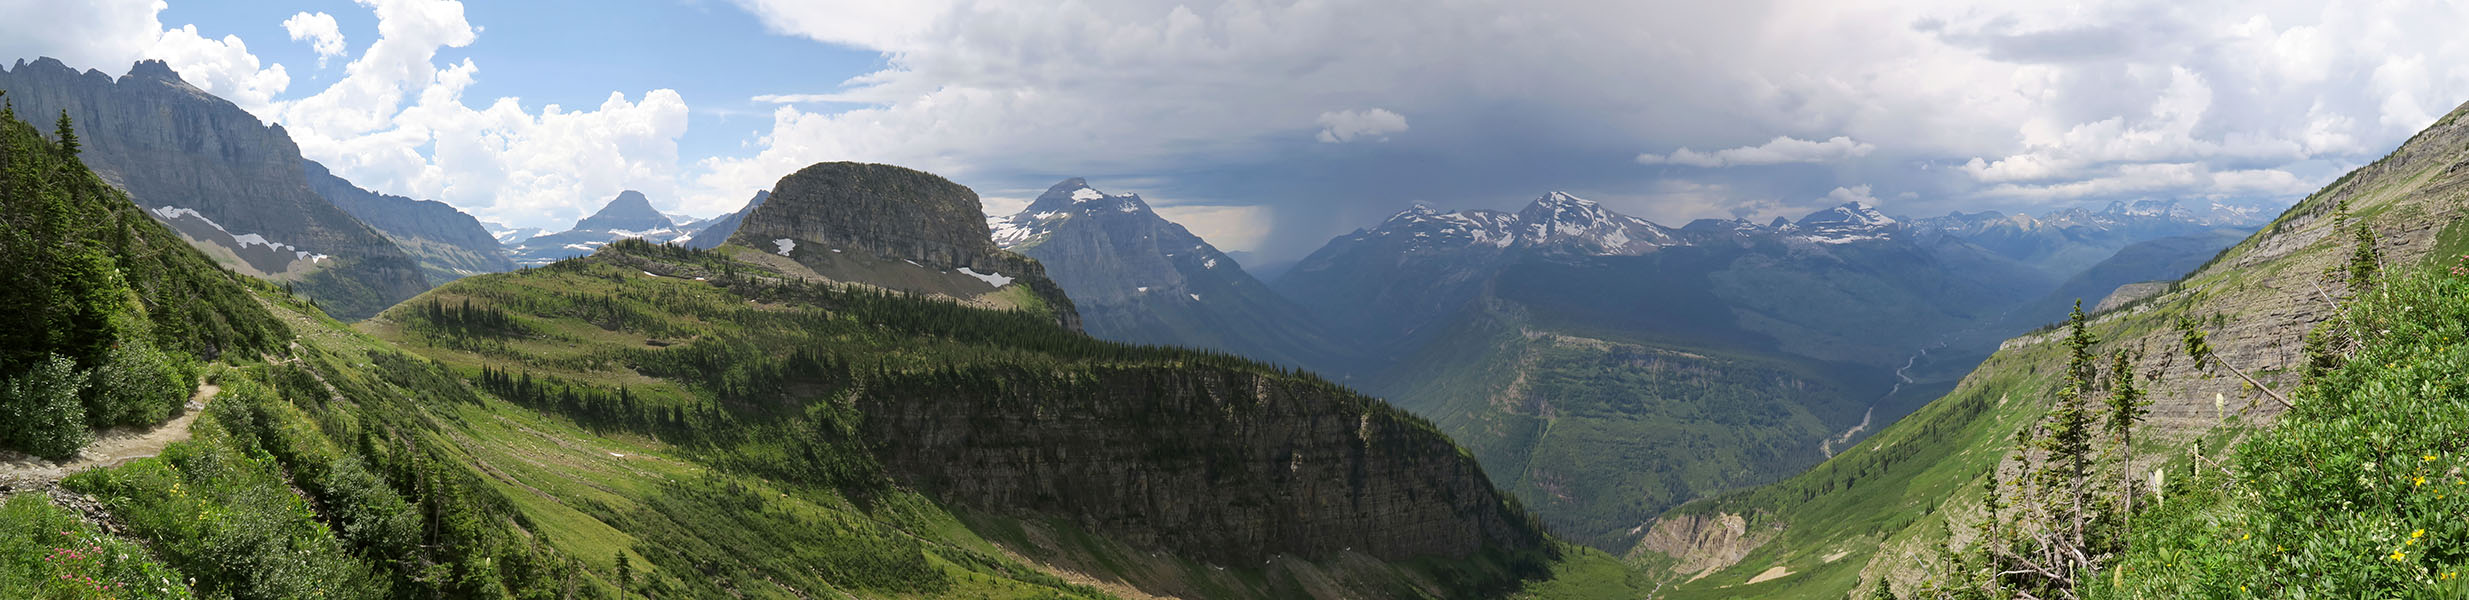 Haystack Butte panorama [Highline Trail, Glacier National Park, Flathead County, Montana]